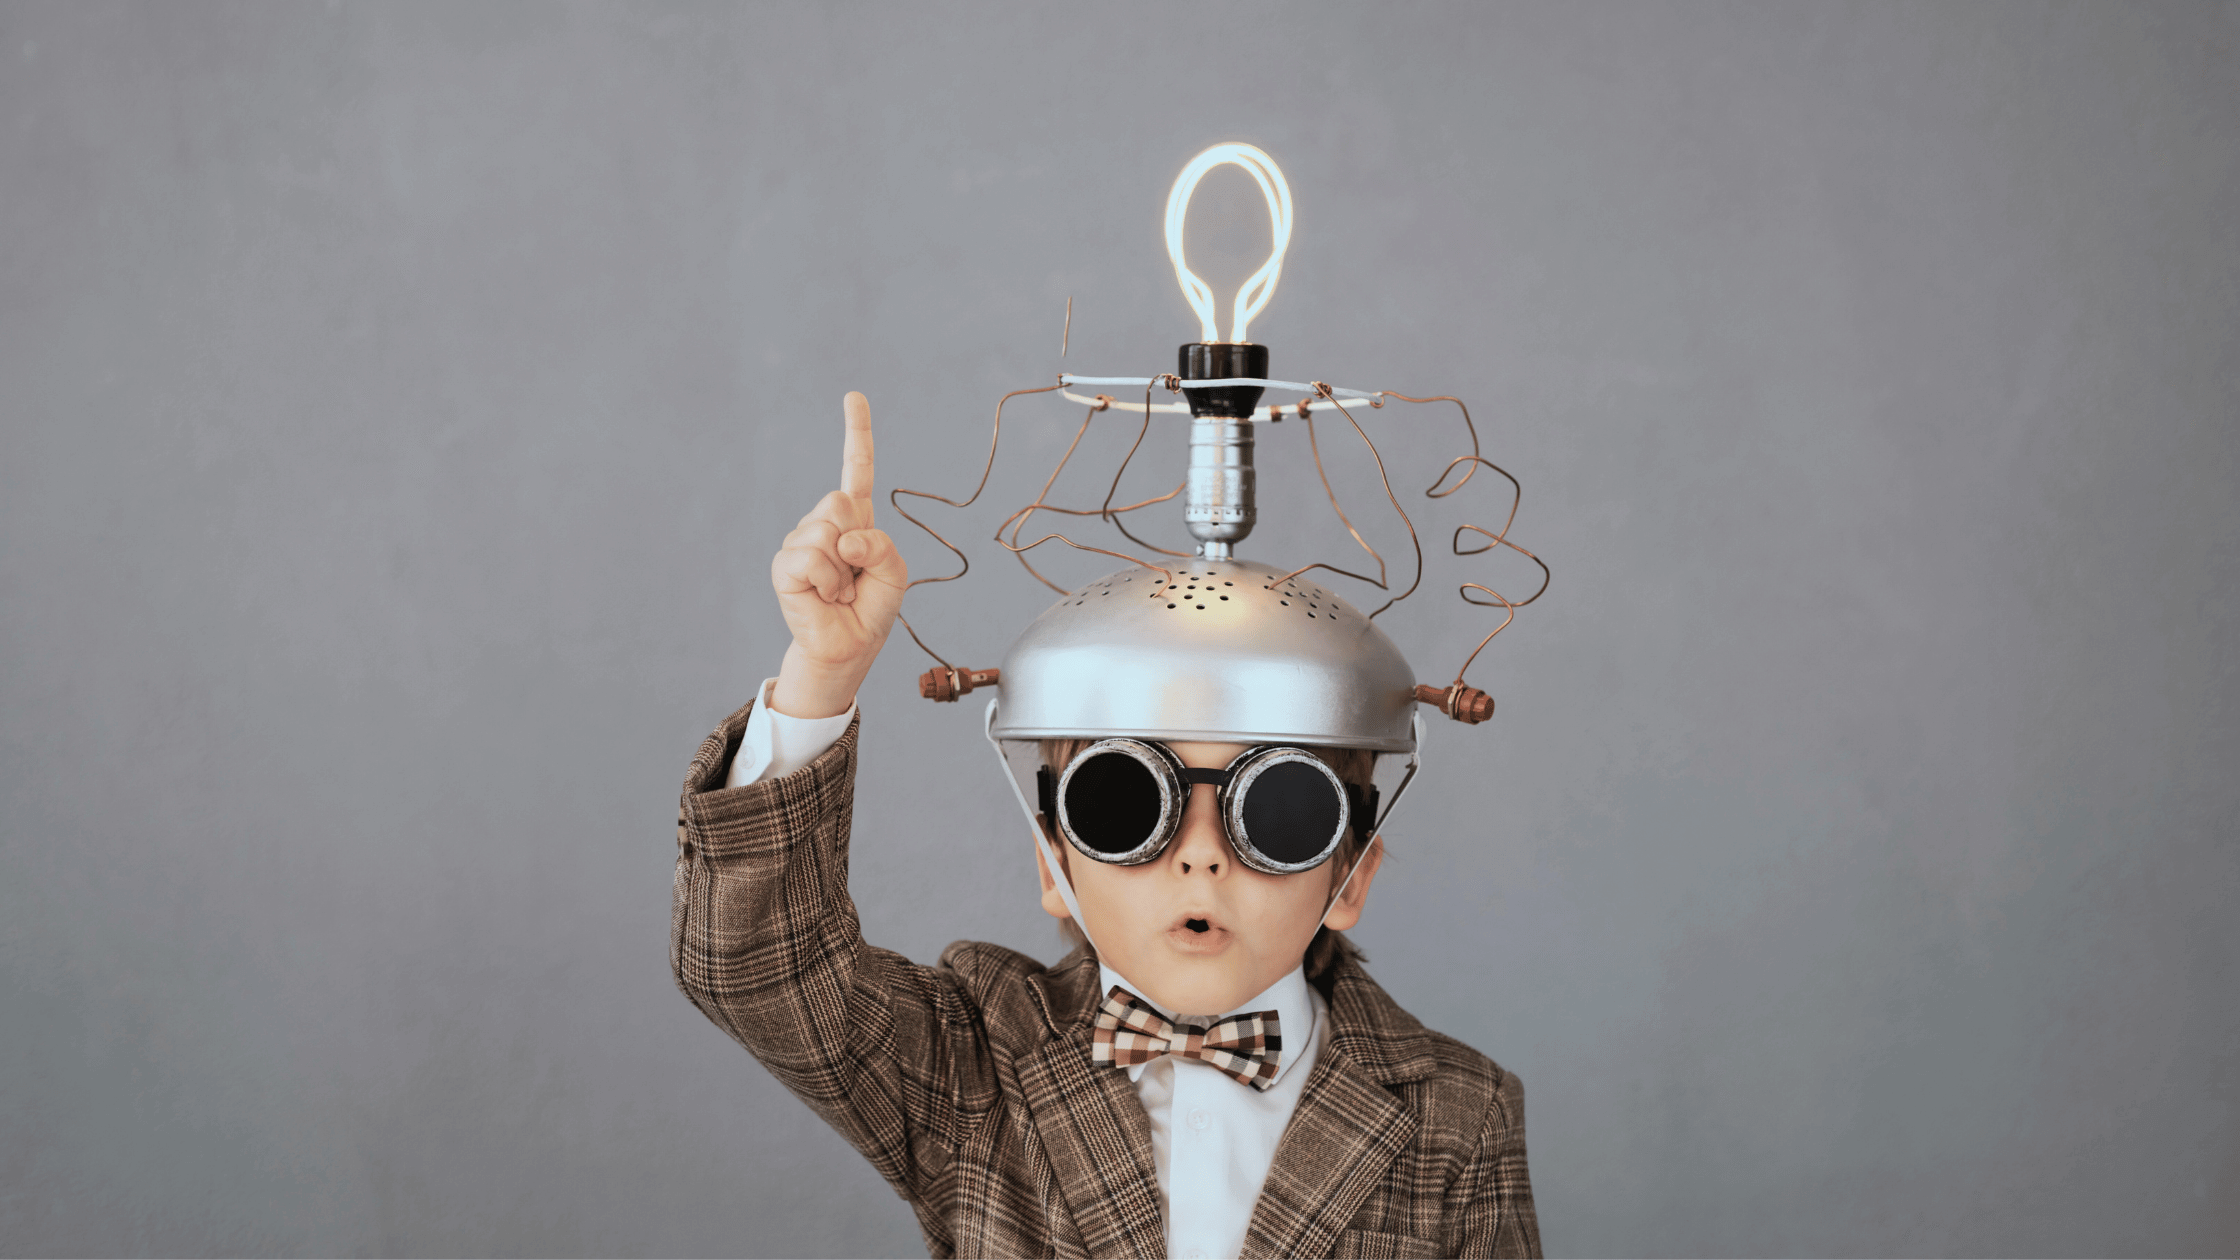 Kid genius wearing a metal handmade idea hat with lightbulb. His face looks like he is saying "I have an idea". Our Fractional CFO geniuses can help you with your SaaS metrics.